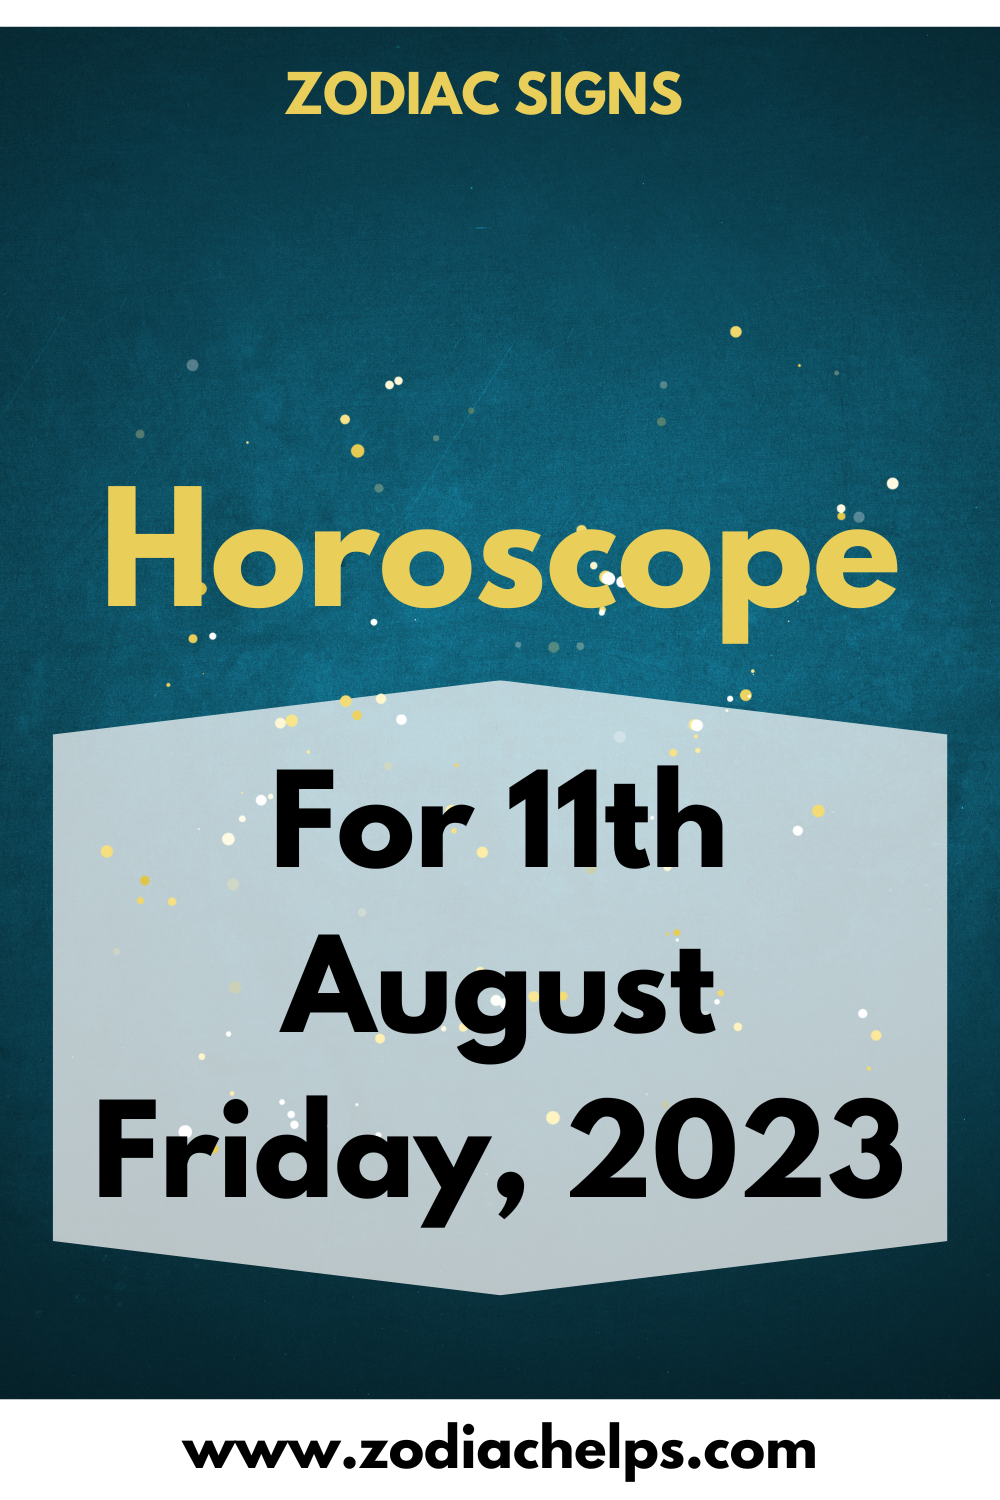 Horoscope for 11th August Friday, 2023